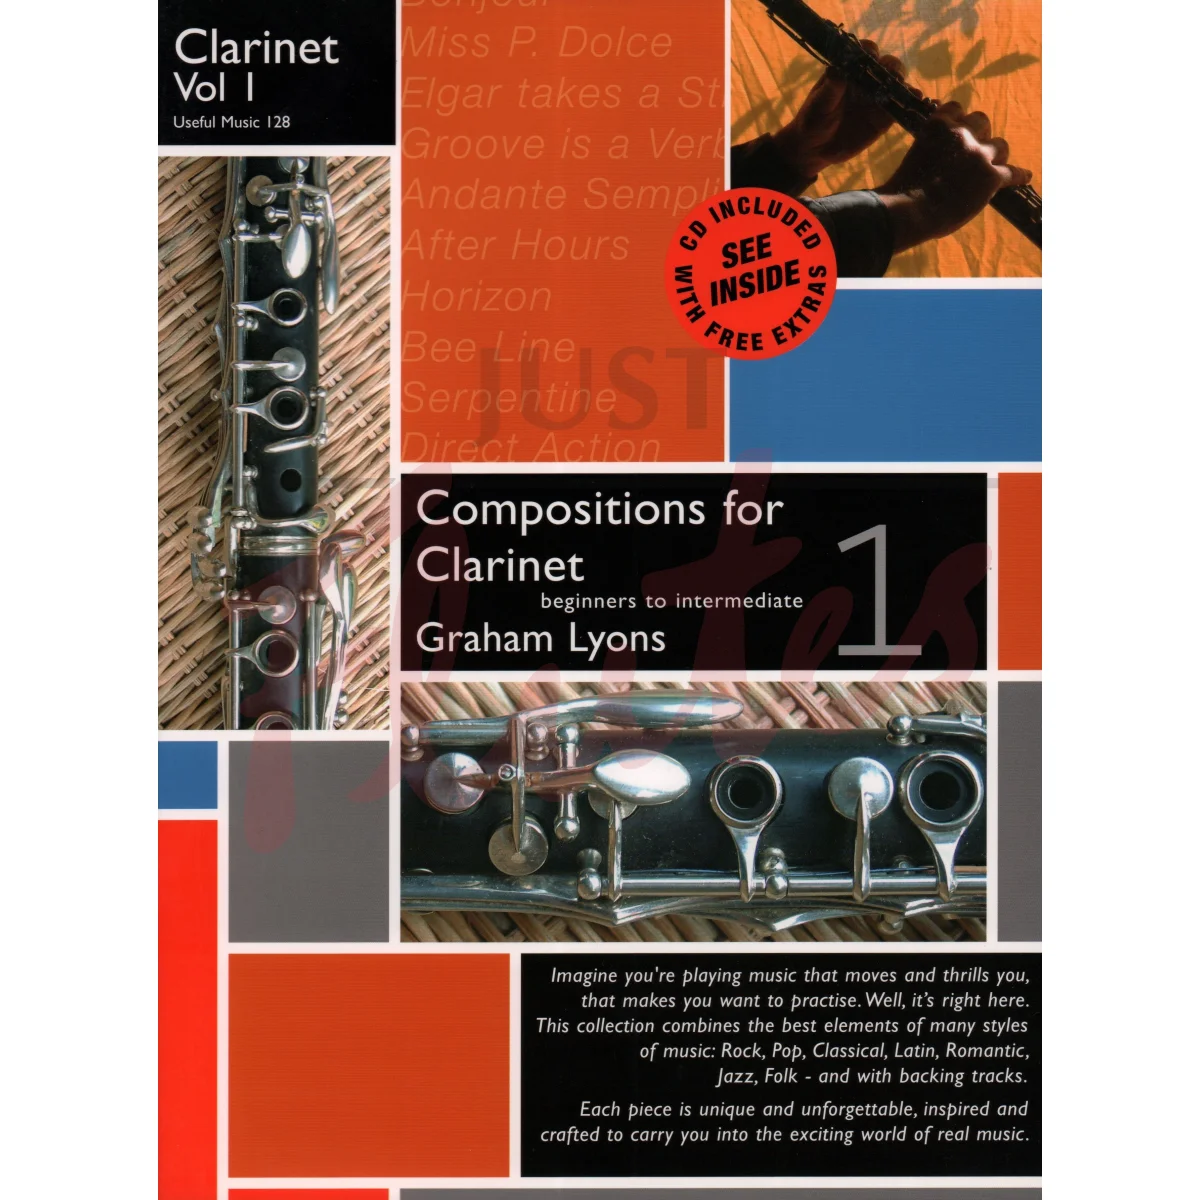 Compositions for Clarinet Vol 1